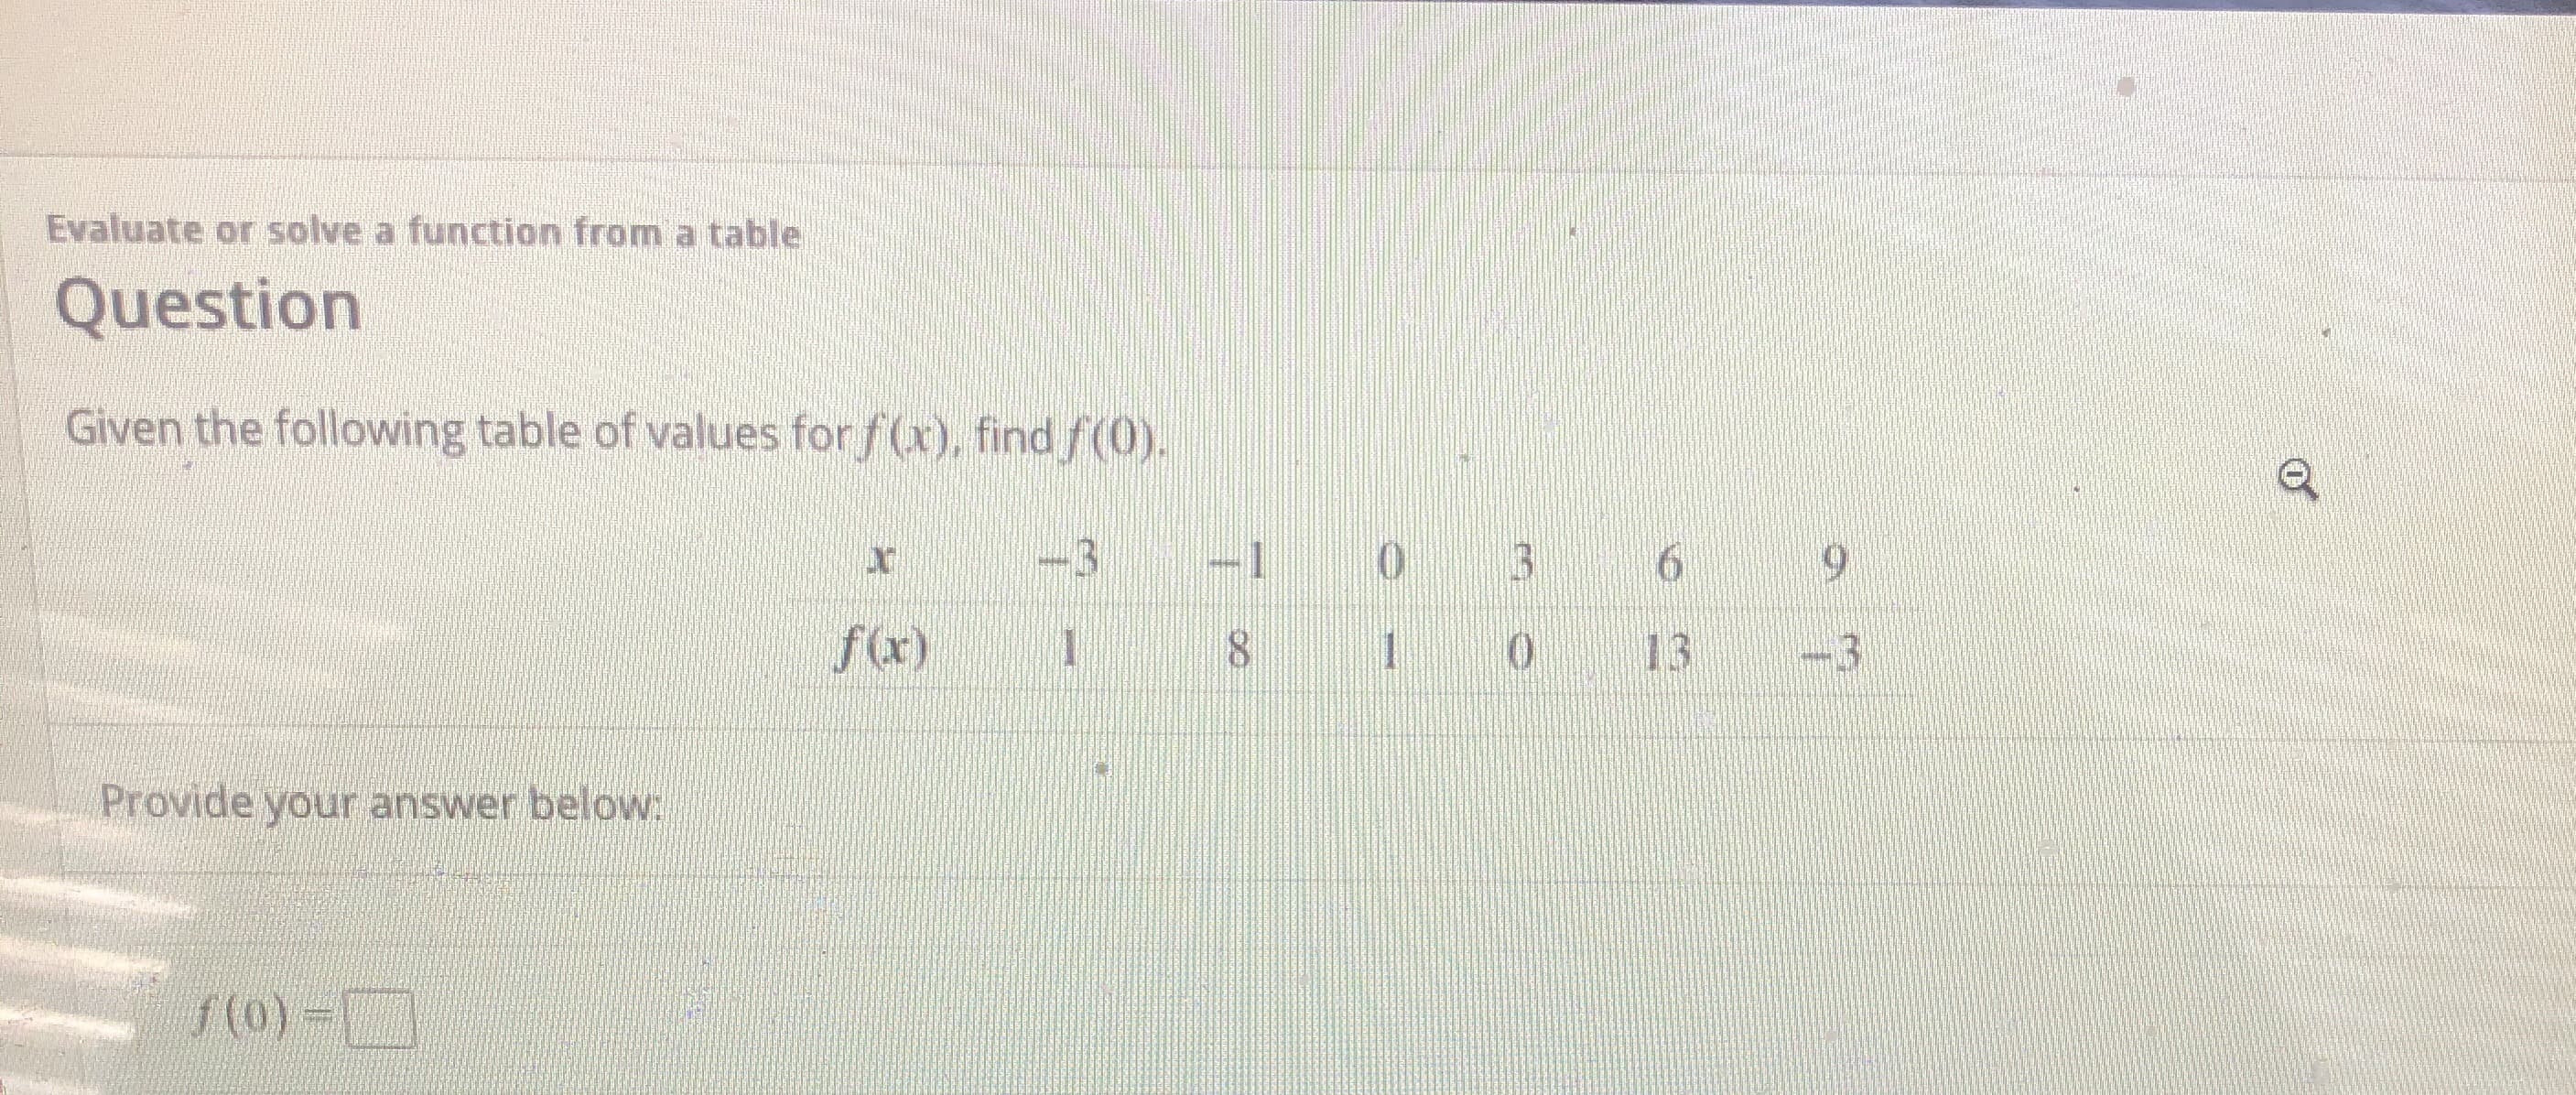 Given the following table of values for f(x), find f(0).
-3 -1 0 3
